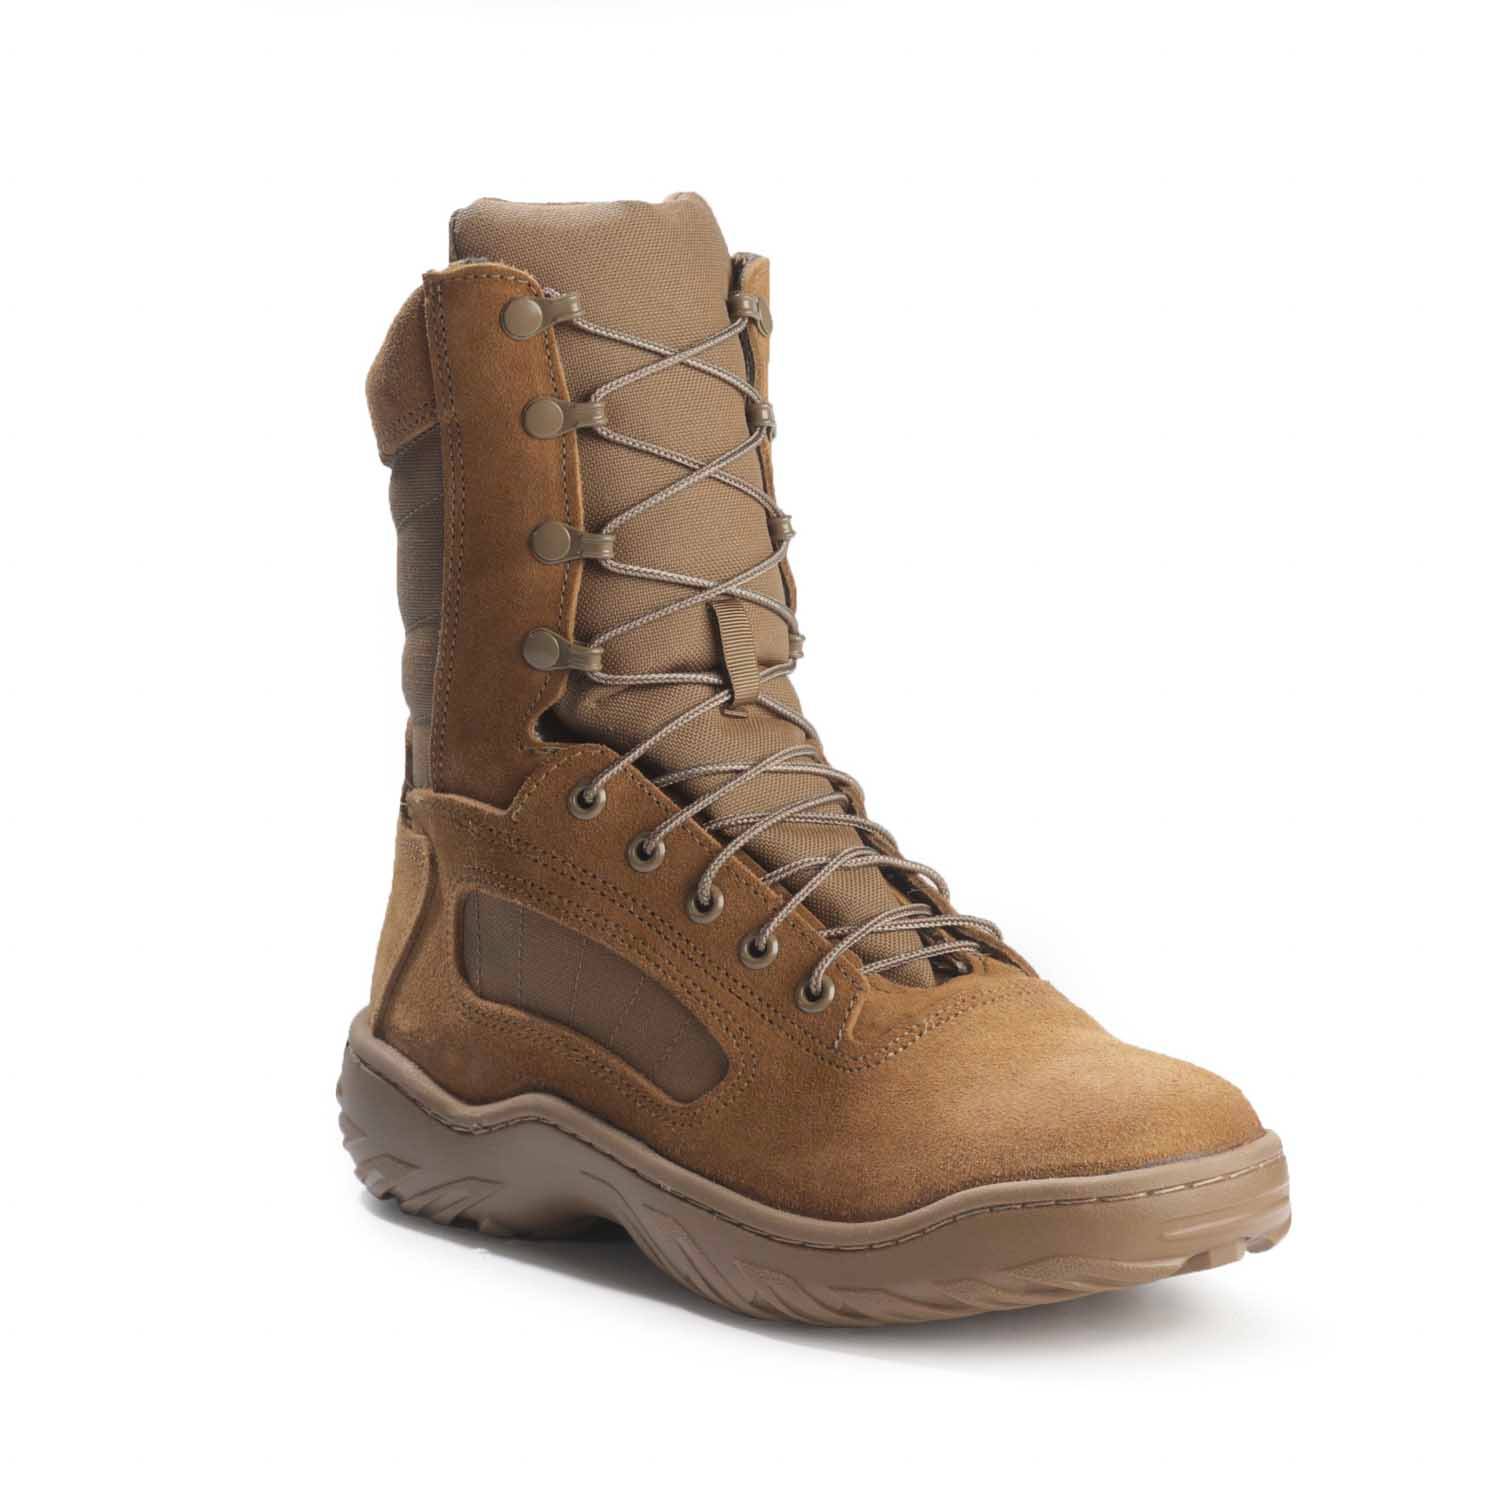 reebok military boots coyote